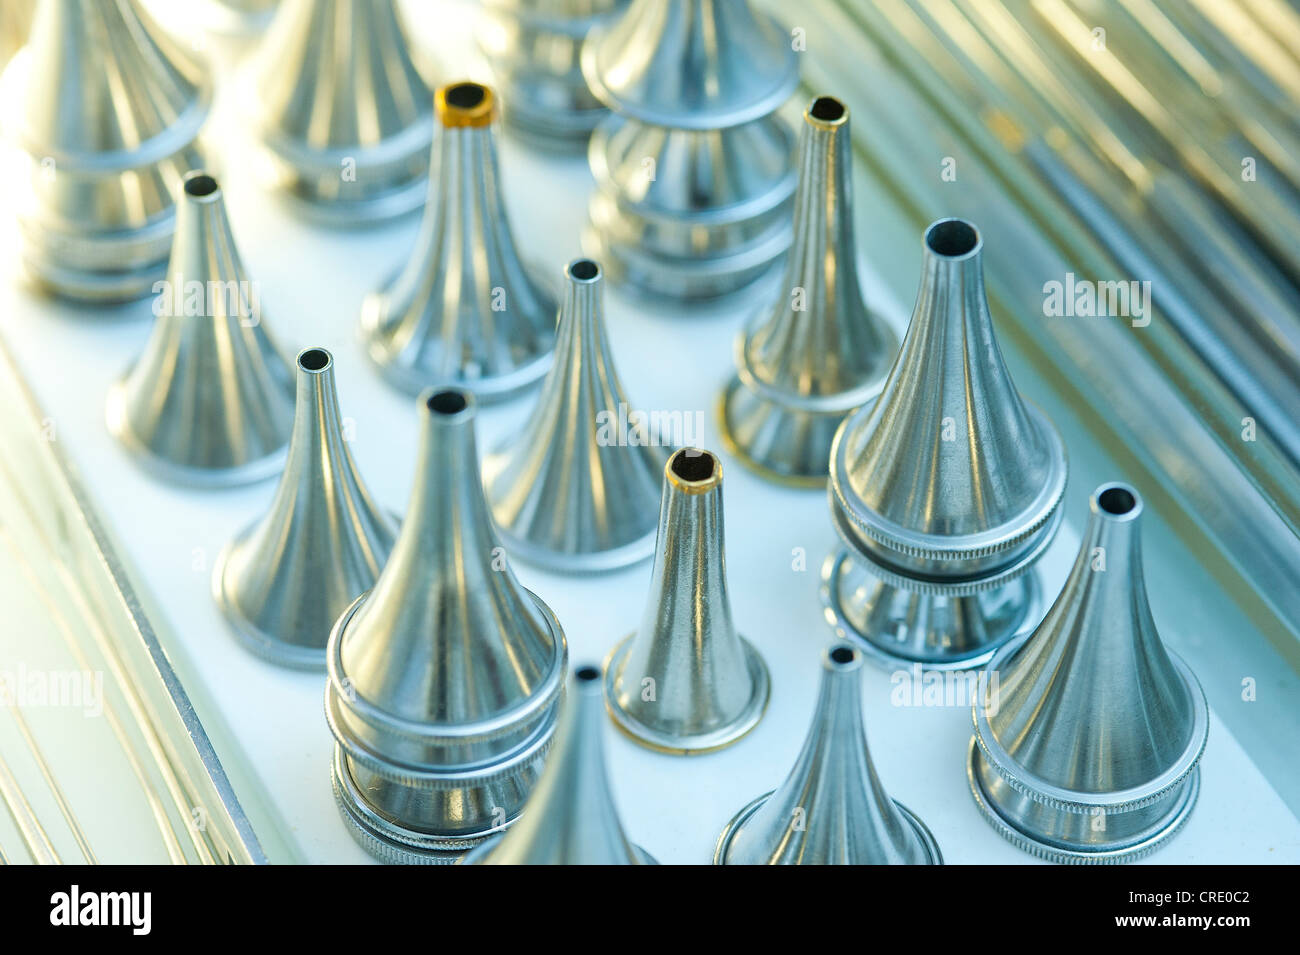 Small cones or funnels for examinations carried out by an ear, nose and throat specialist, medical instruments Stock Photo